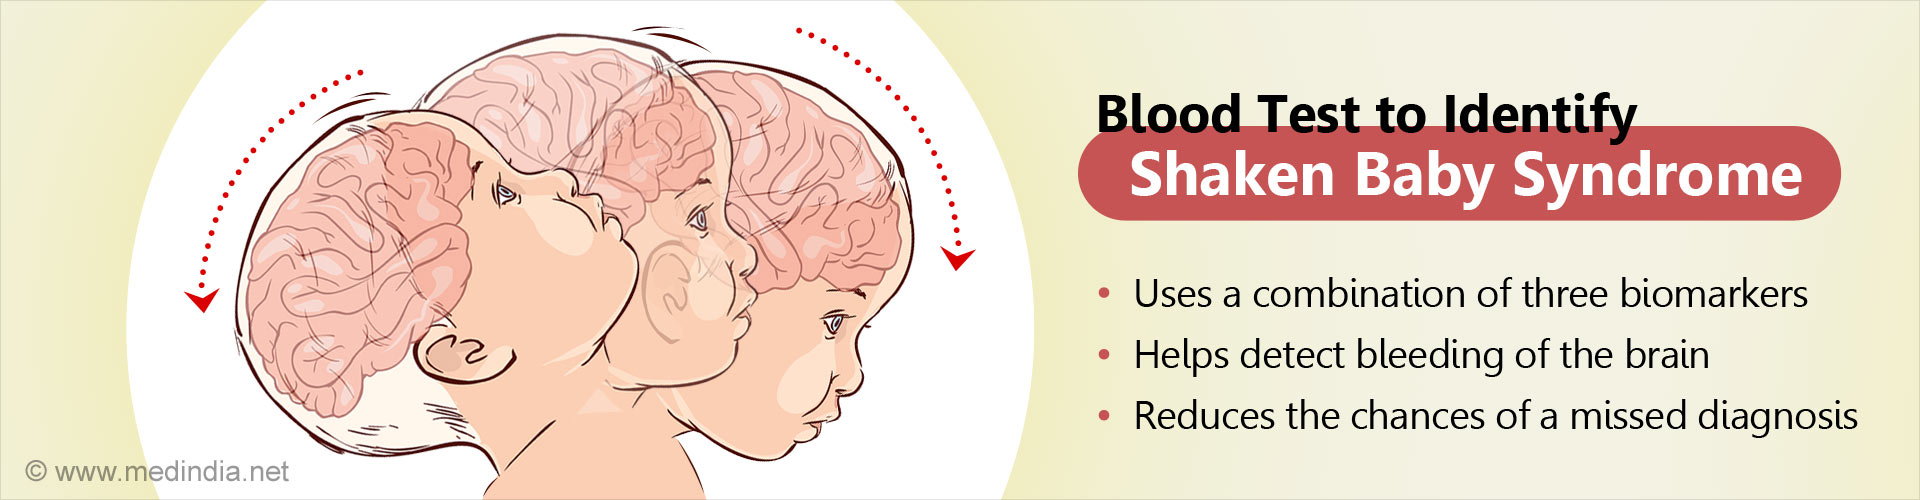 Blood Test to Identify Shaken Baby Syndrome
- Uses a combination of three biomarkers
- Helps detect bleeding of the brain
- Reduces the chances of a missed diagnosis